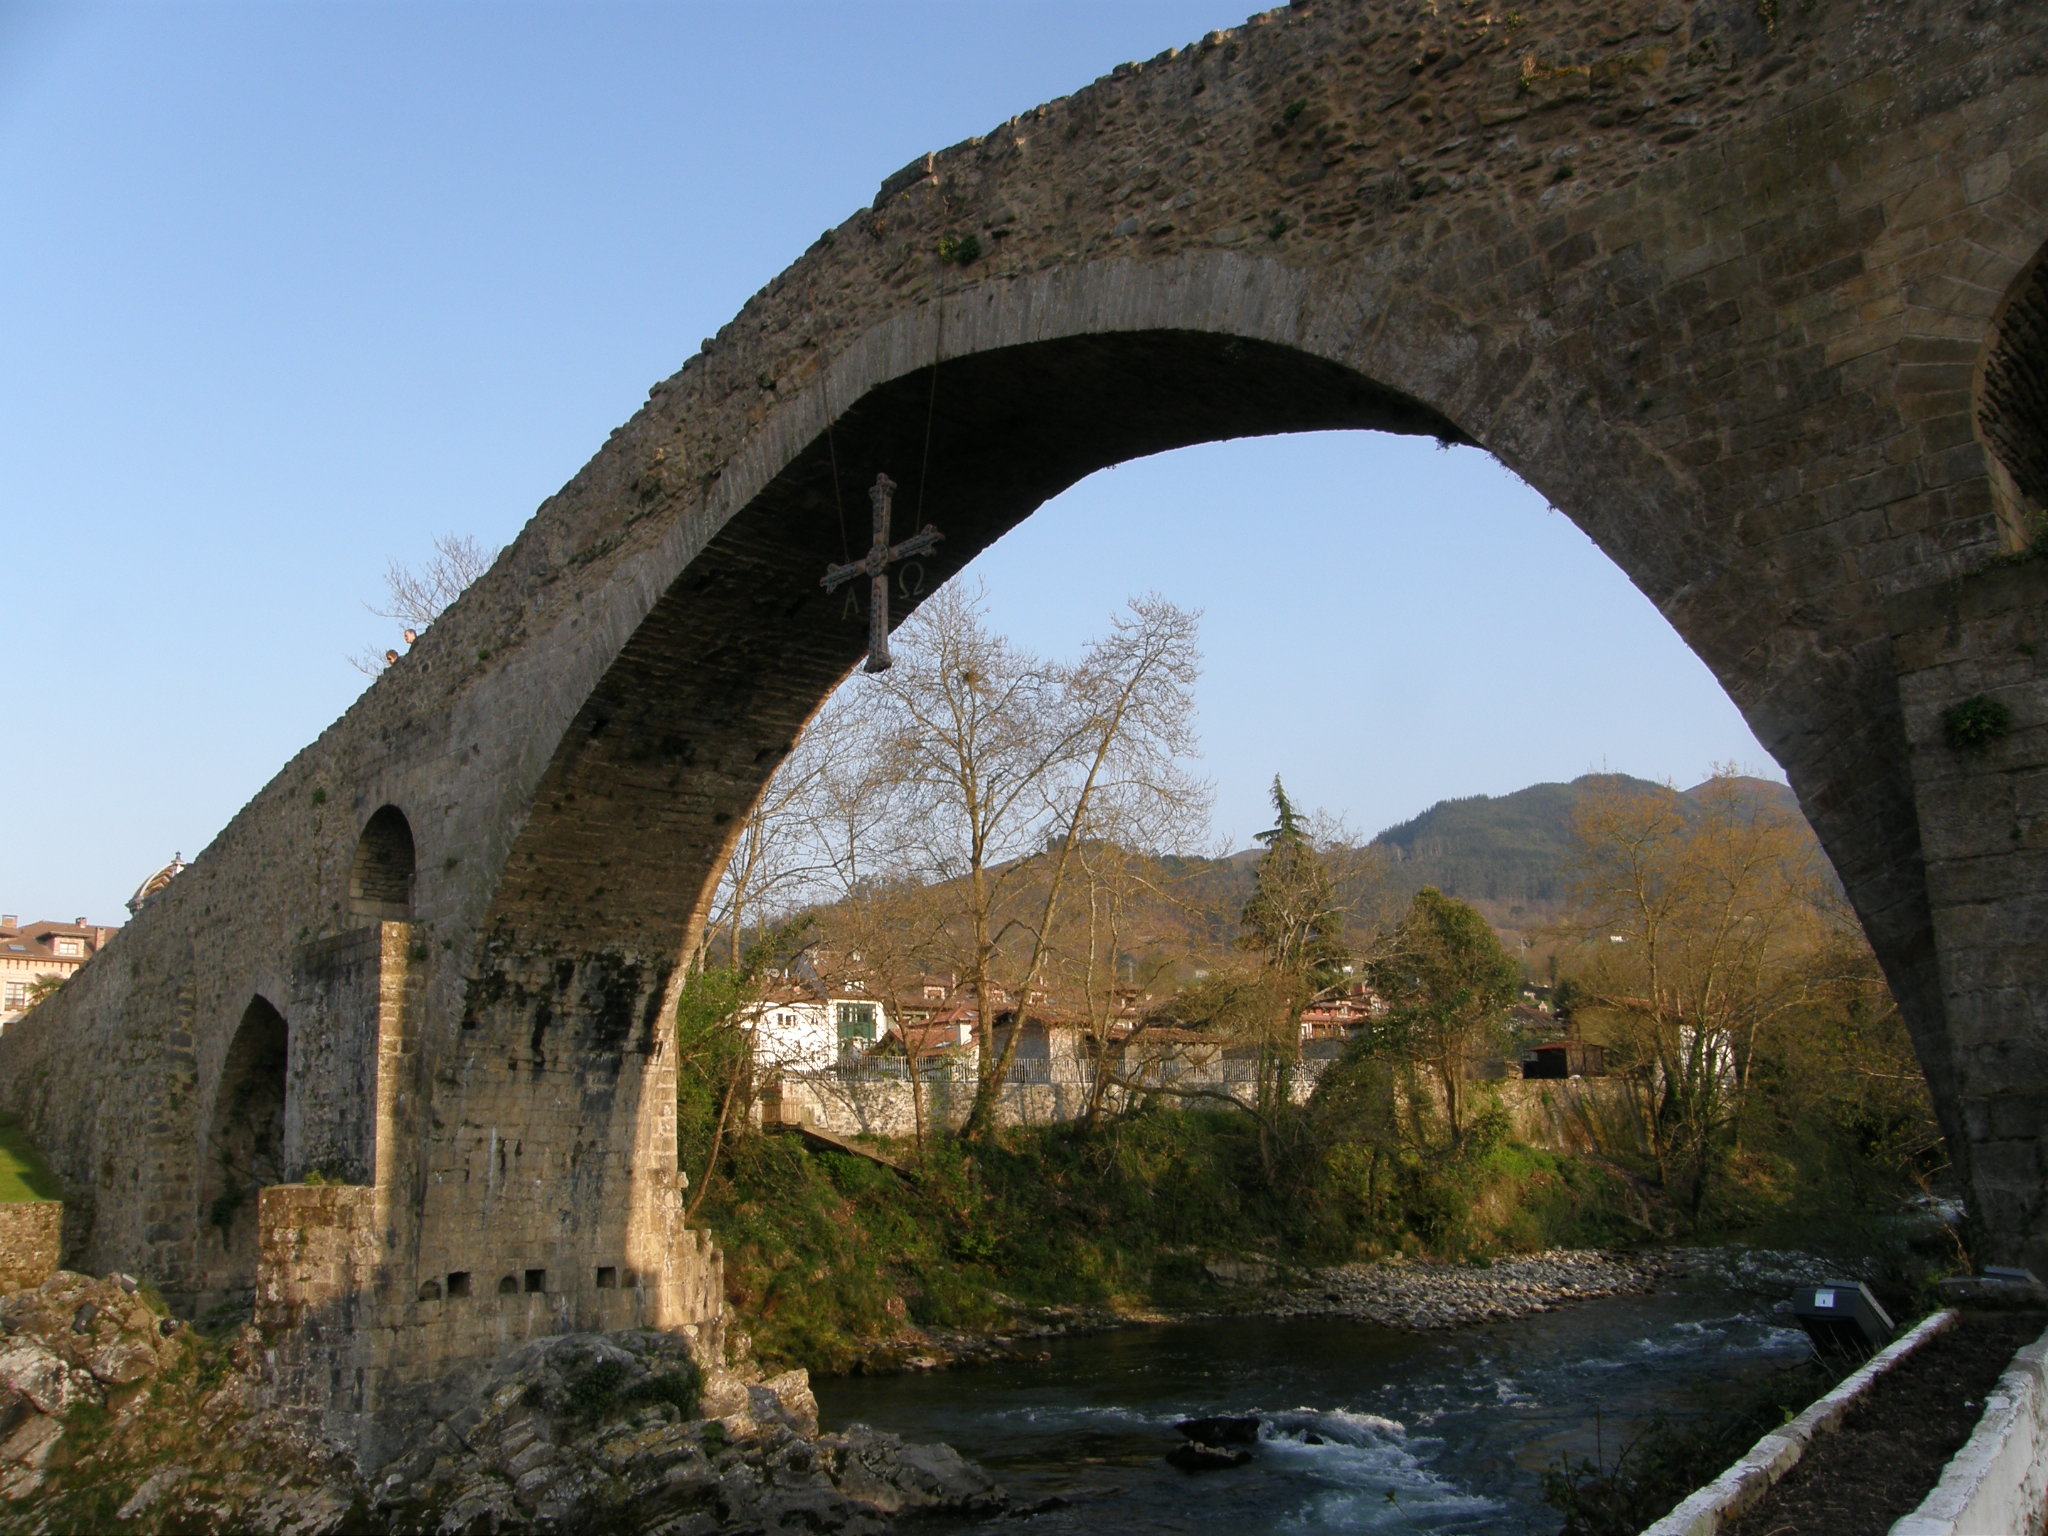 two bridges with the tops open over a river